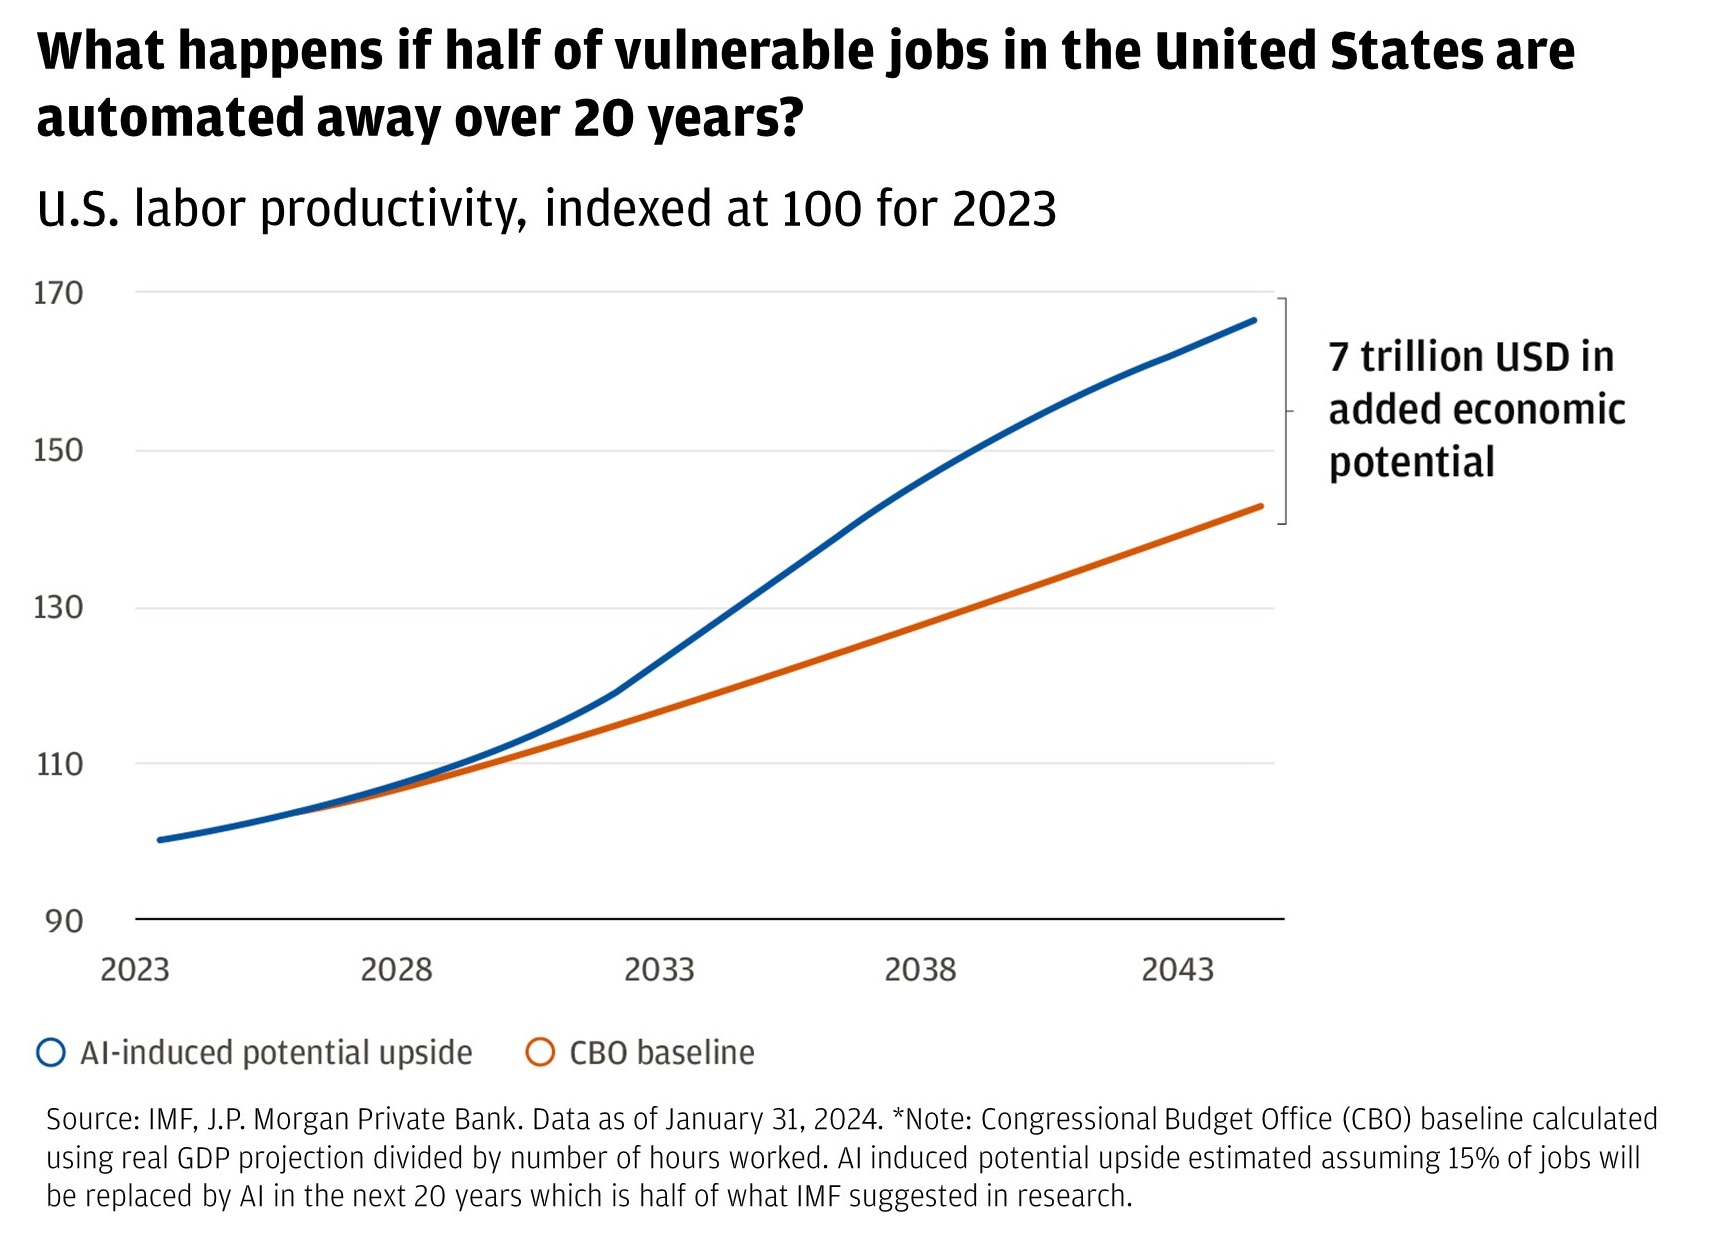 Chart describes U.S. labor productivity indexed at 100 for 2023 (CBO baseline and AI-induced potential upside).